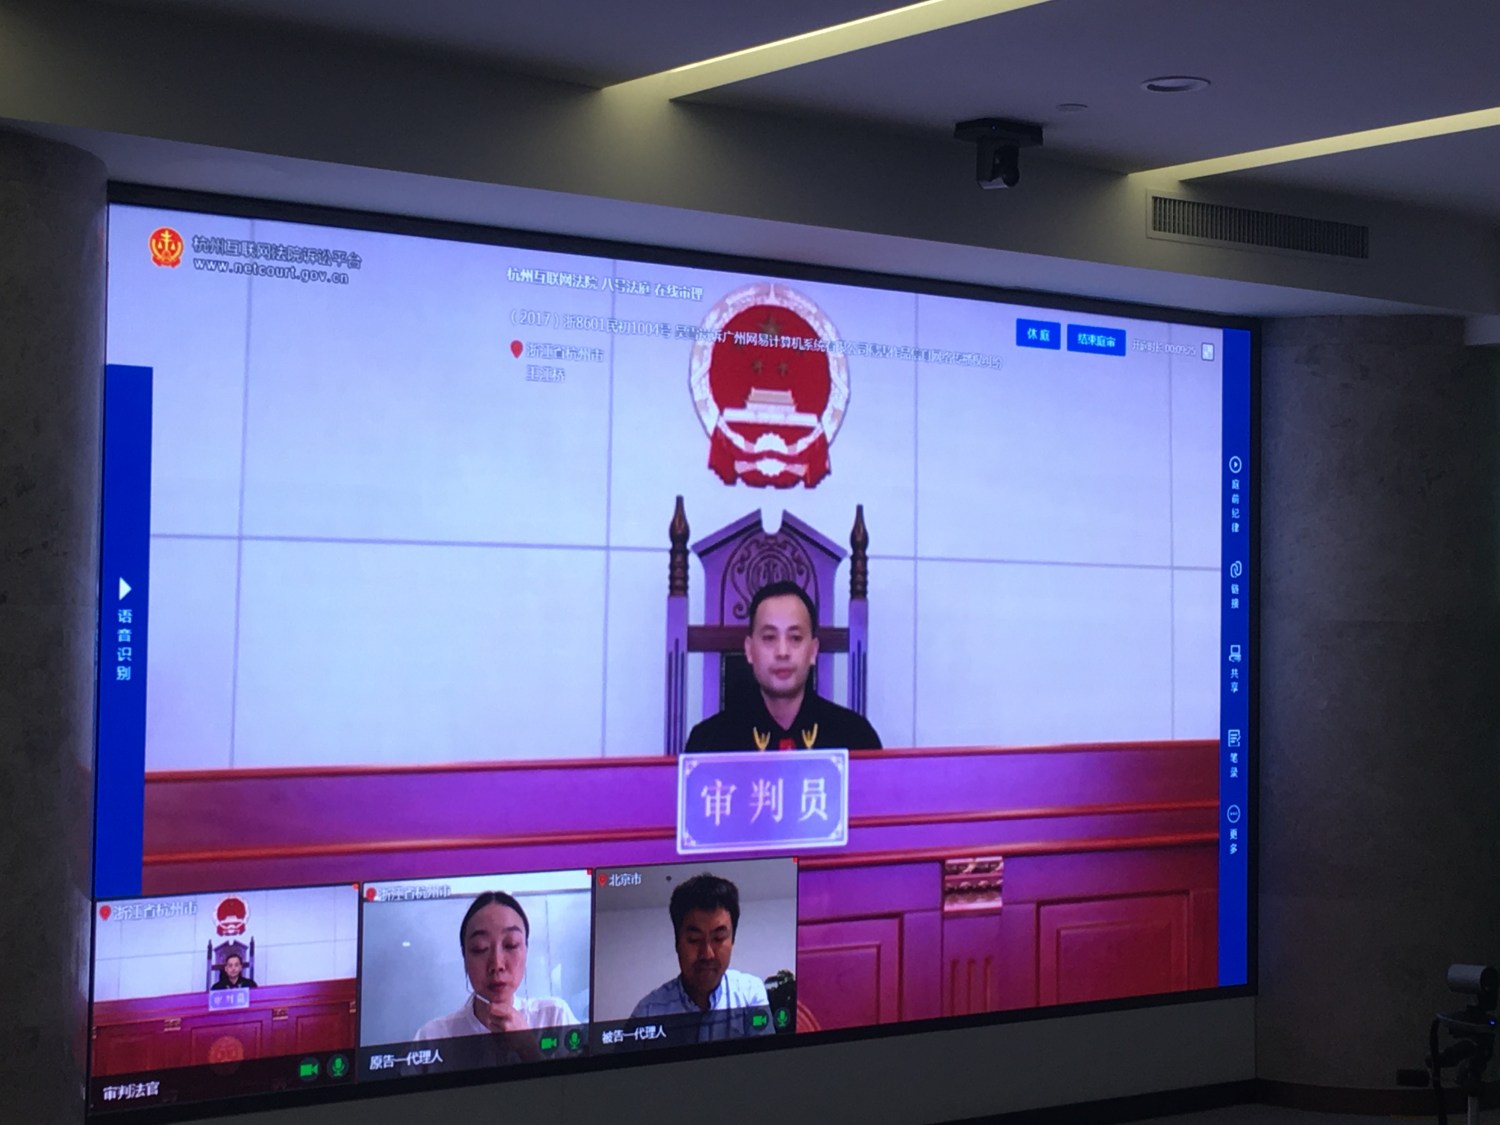 View of an online hearing of an internet-related case at Hangzhou Court of the Internet, the first internet court in the world, in Hangzhou city, east China's Zhejiang province, 18 August 2017.Hangzhou Court of the Internet, set up to handle the soaring number of online disputes, has gone online in Hangzhou, Zhejiang province, on Friday (18 August 2017). It is said to be the first internet court in the world, and it will focus on hearing six kinds of civil and administrative internet-related disputes, including online piracy and e-commerce. The court has generated attention among internet and legal industries since its establishment was formally approved by the central leadership by the end of June.No Use China. No Use France.